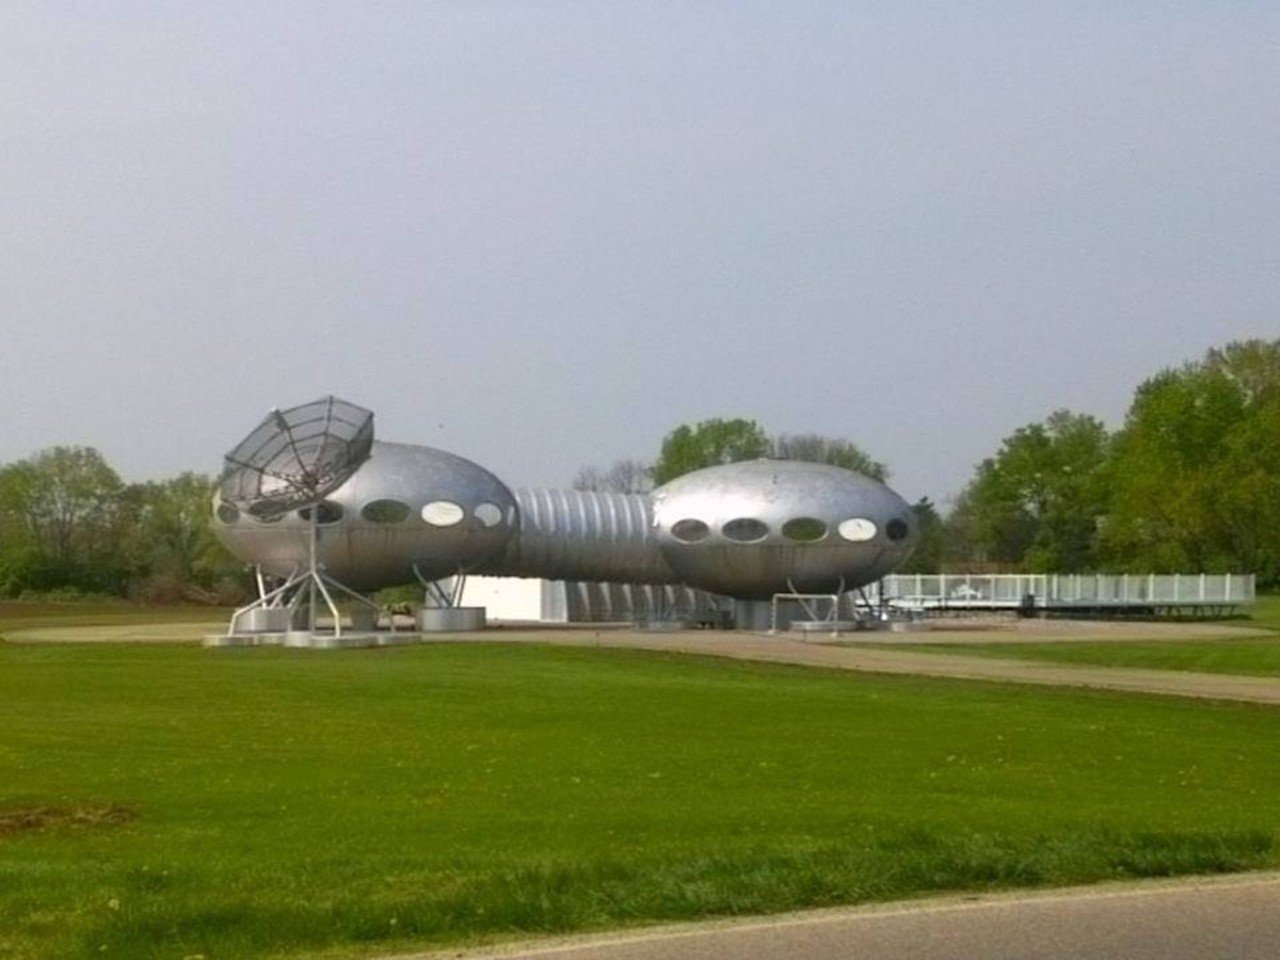 The FUTURO House
9961 Central Ave., Carlisle
Finnish architect Matti Suuronen designed around 100 houses shaped like spaceships during the ‘60s and ‘70s. The houses can be found all over the world, but this one is in Carlisle, Ohio, where I-75 meets I-71, just north of Cincinnati.